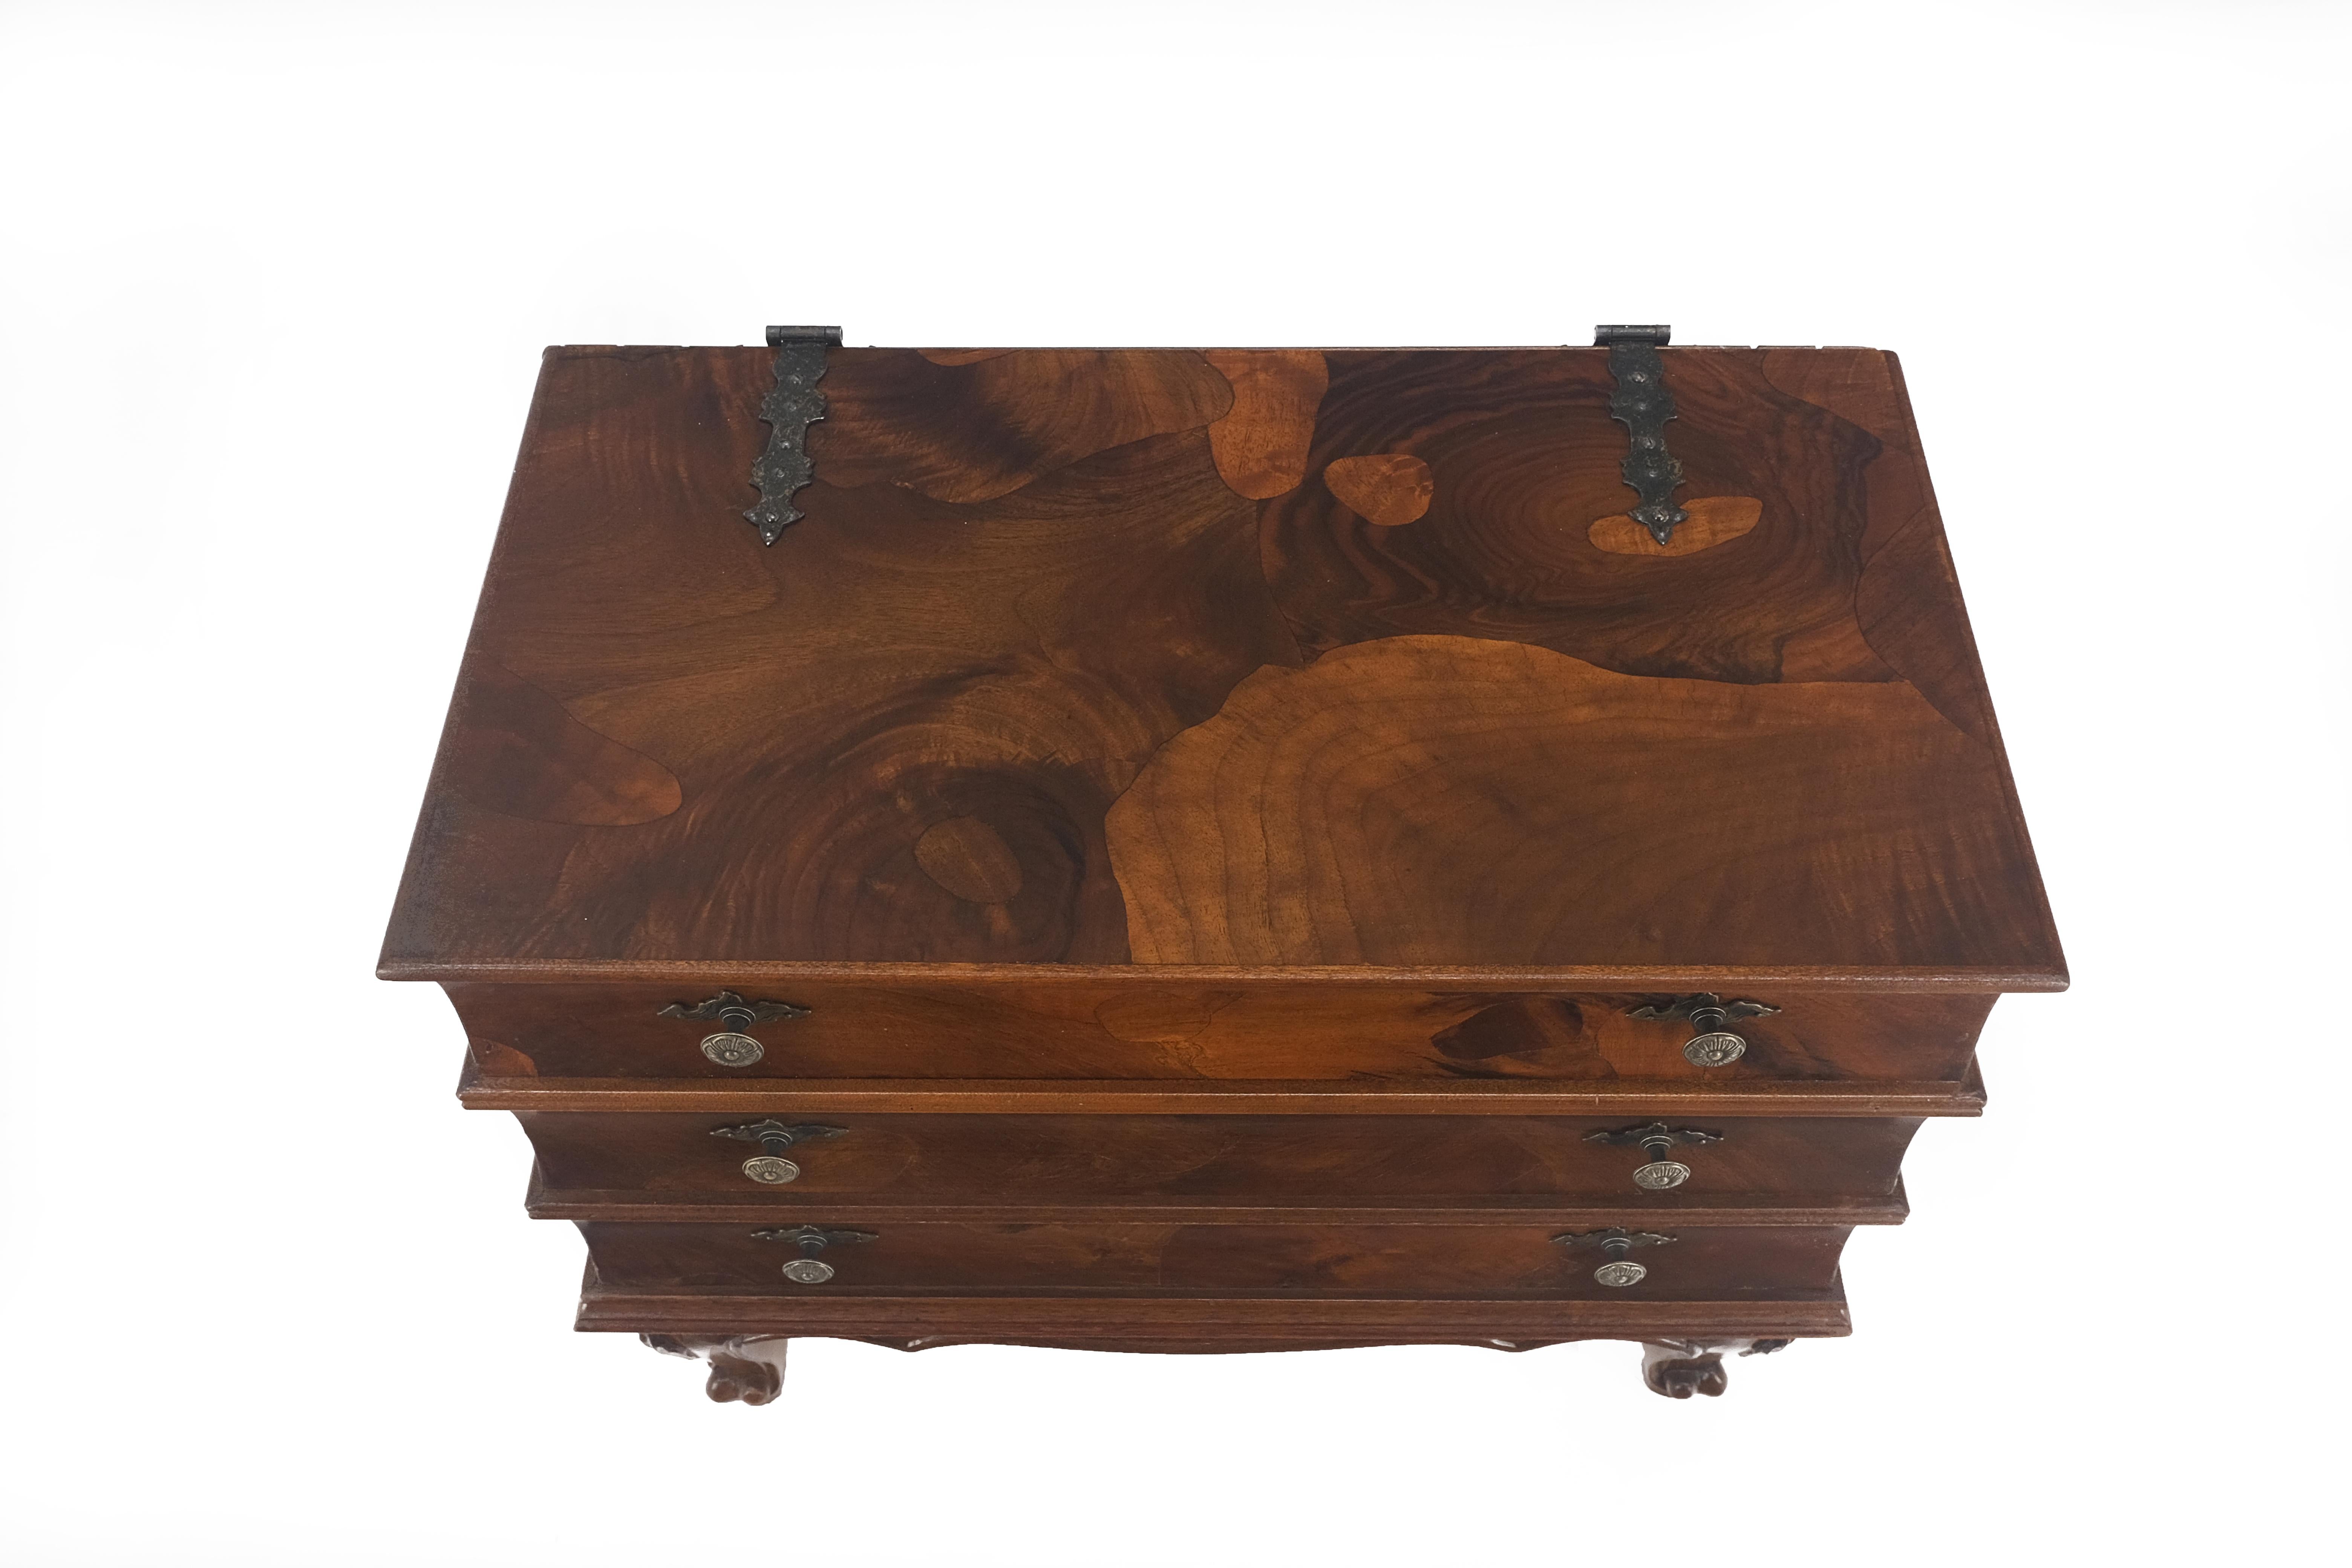 Burl Olive Wood Italian Two Drawer Lift Top Night Stand Cabinet End Table MINT In Good Condition For Sale In Rockaway, NJ